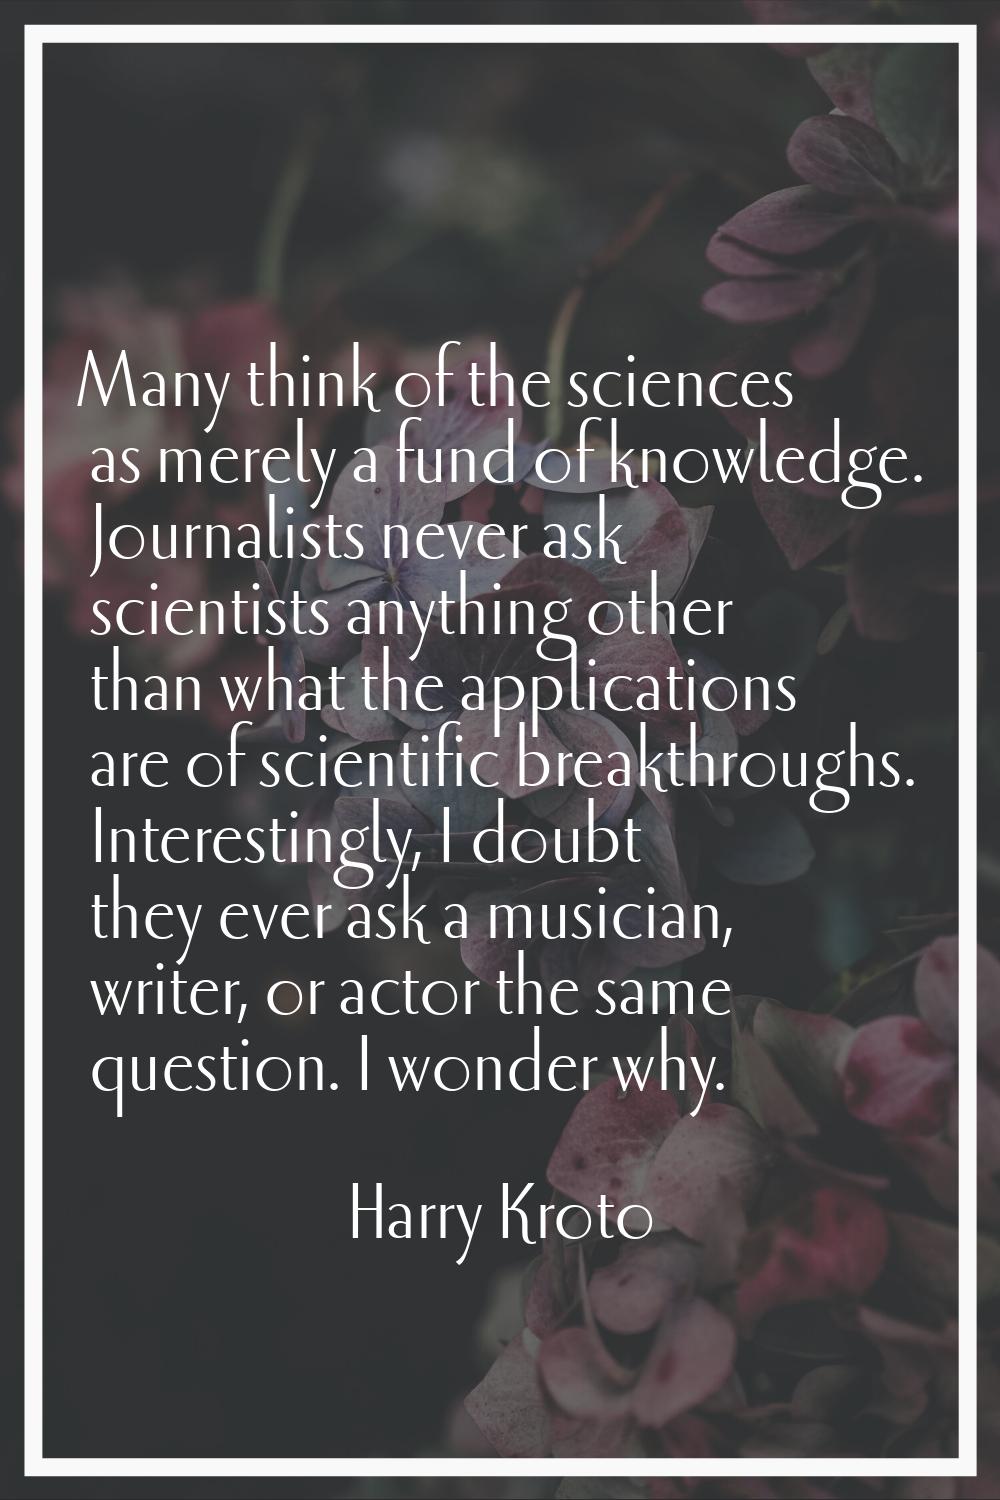 Many think of the sciences as merely a fund of knowledge. Journalists never ask scientists anything